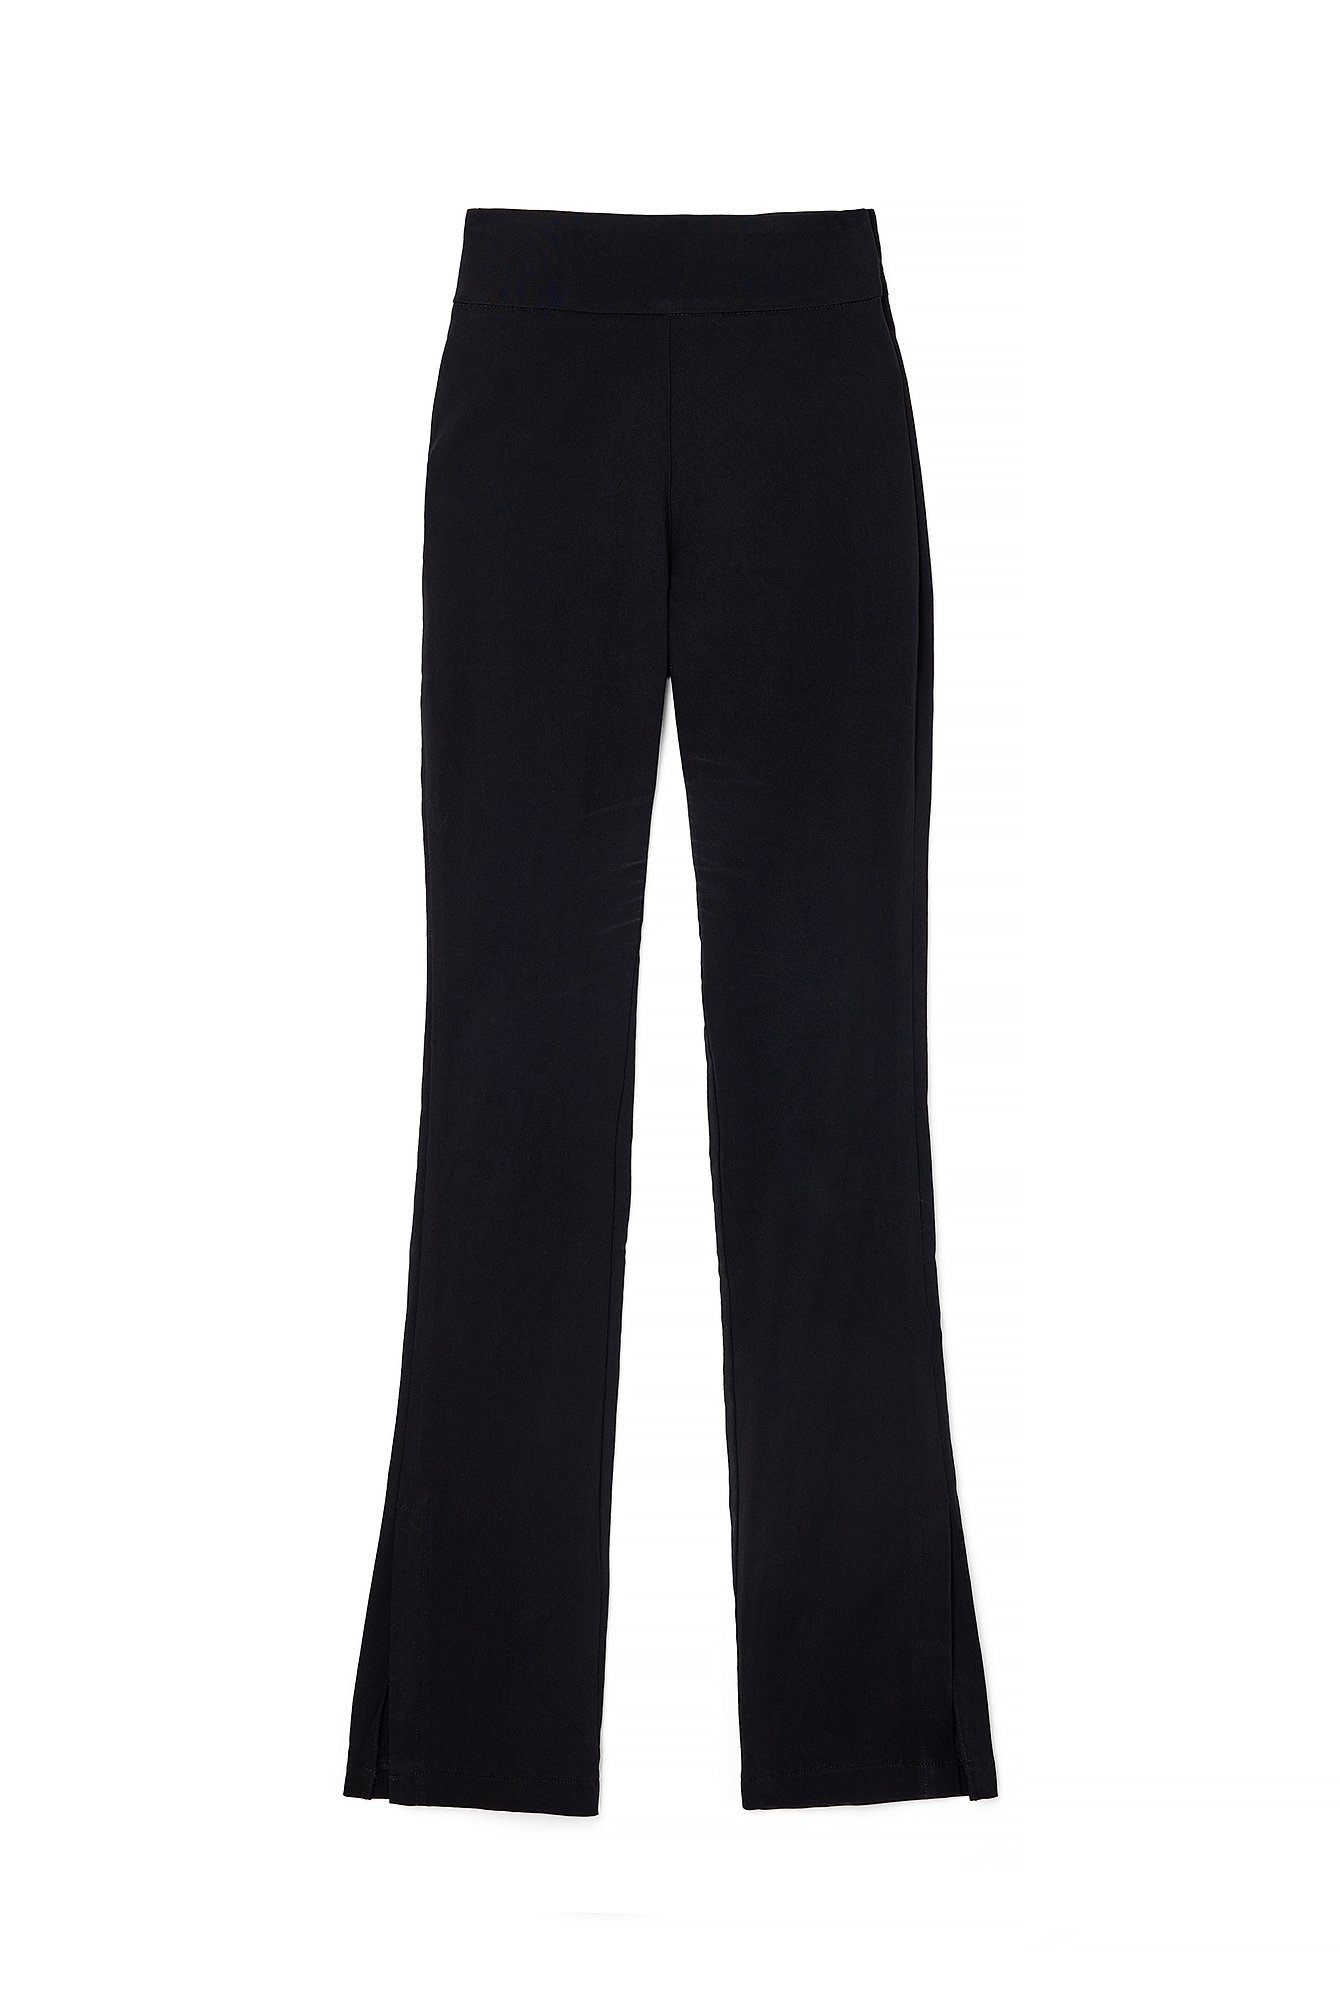 AMhomely Women's Trousers For Work Jeans Wide Legs Denim Pants